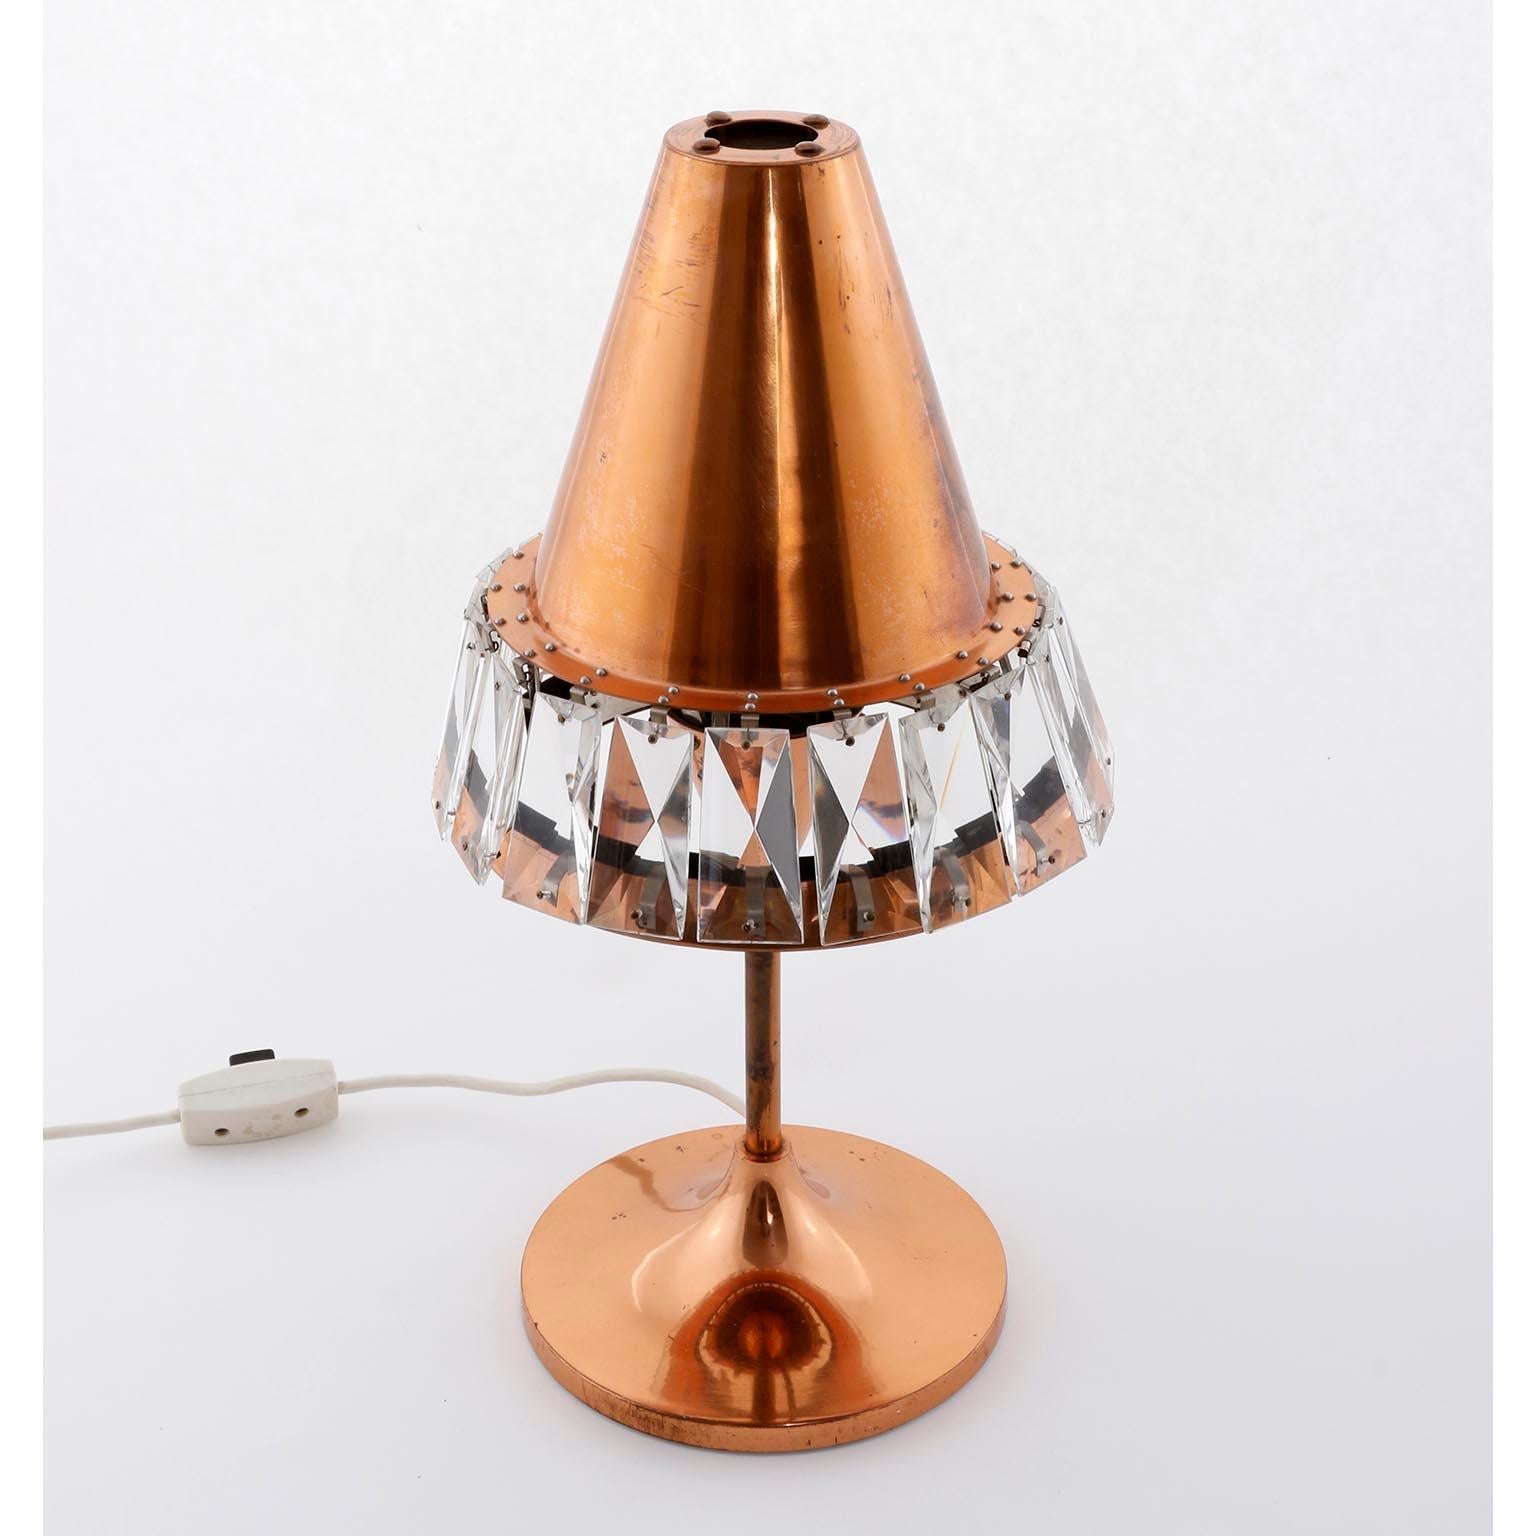 Austrian Bakalowits Table Lamp, Patinated Copper Nickel Crystal Glass, Austria, 1960s For Sale